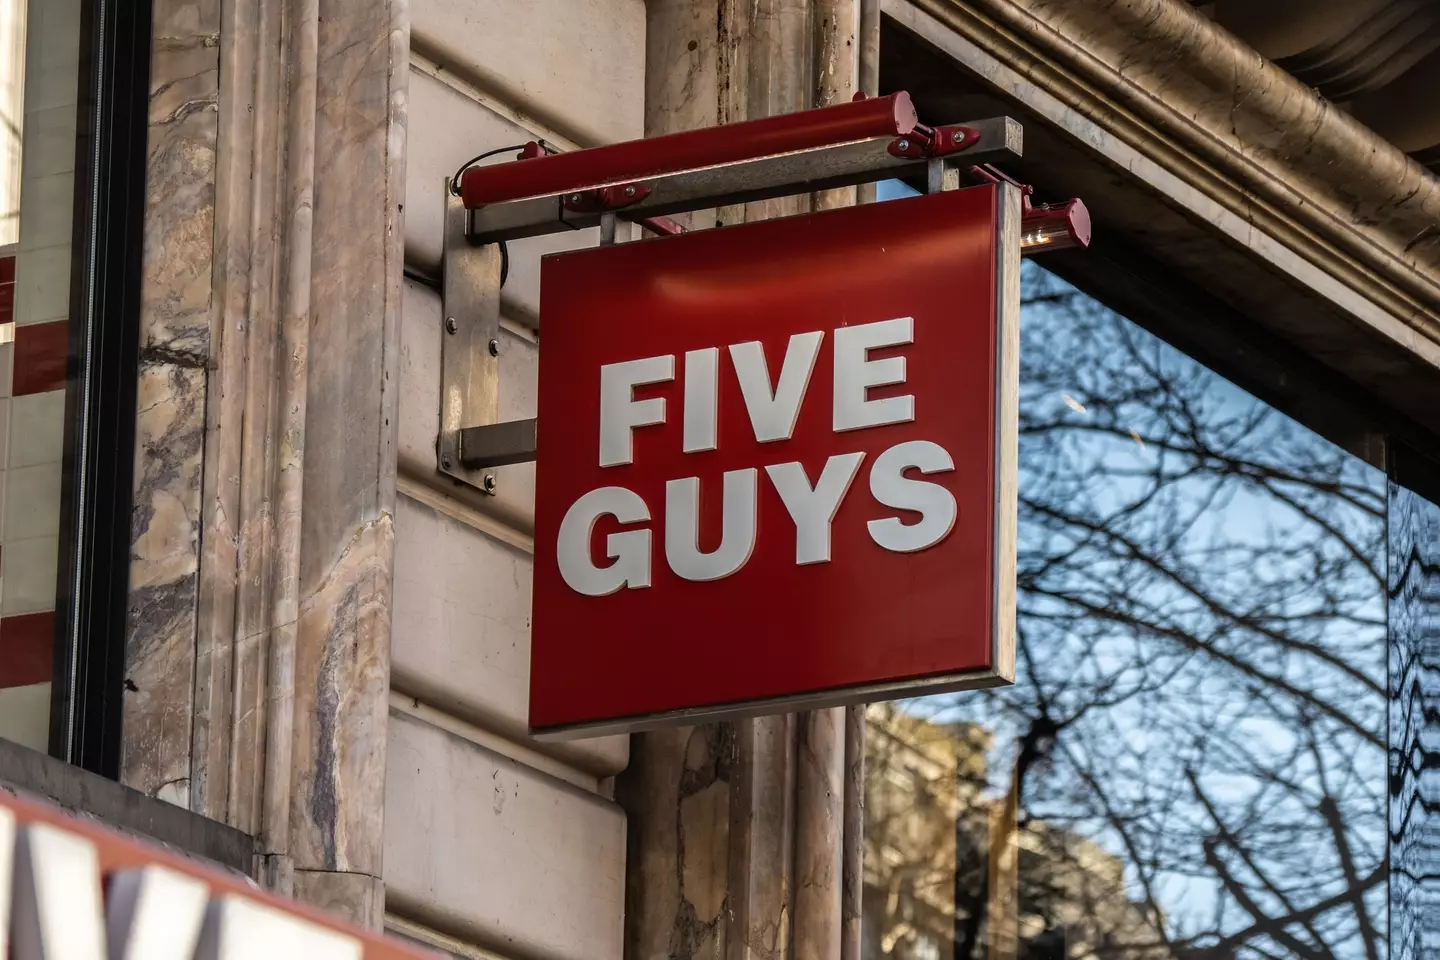 Five Guys positions itself in the market as a premium fast food restaurant.